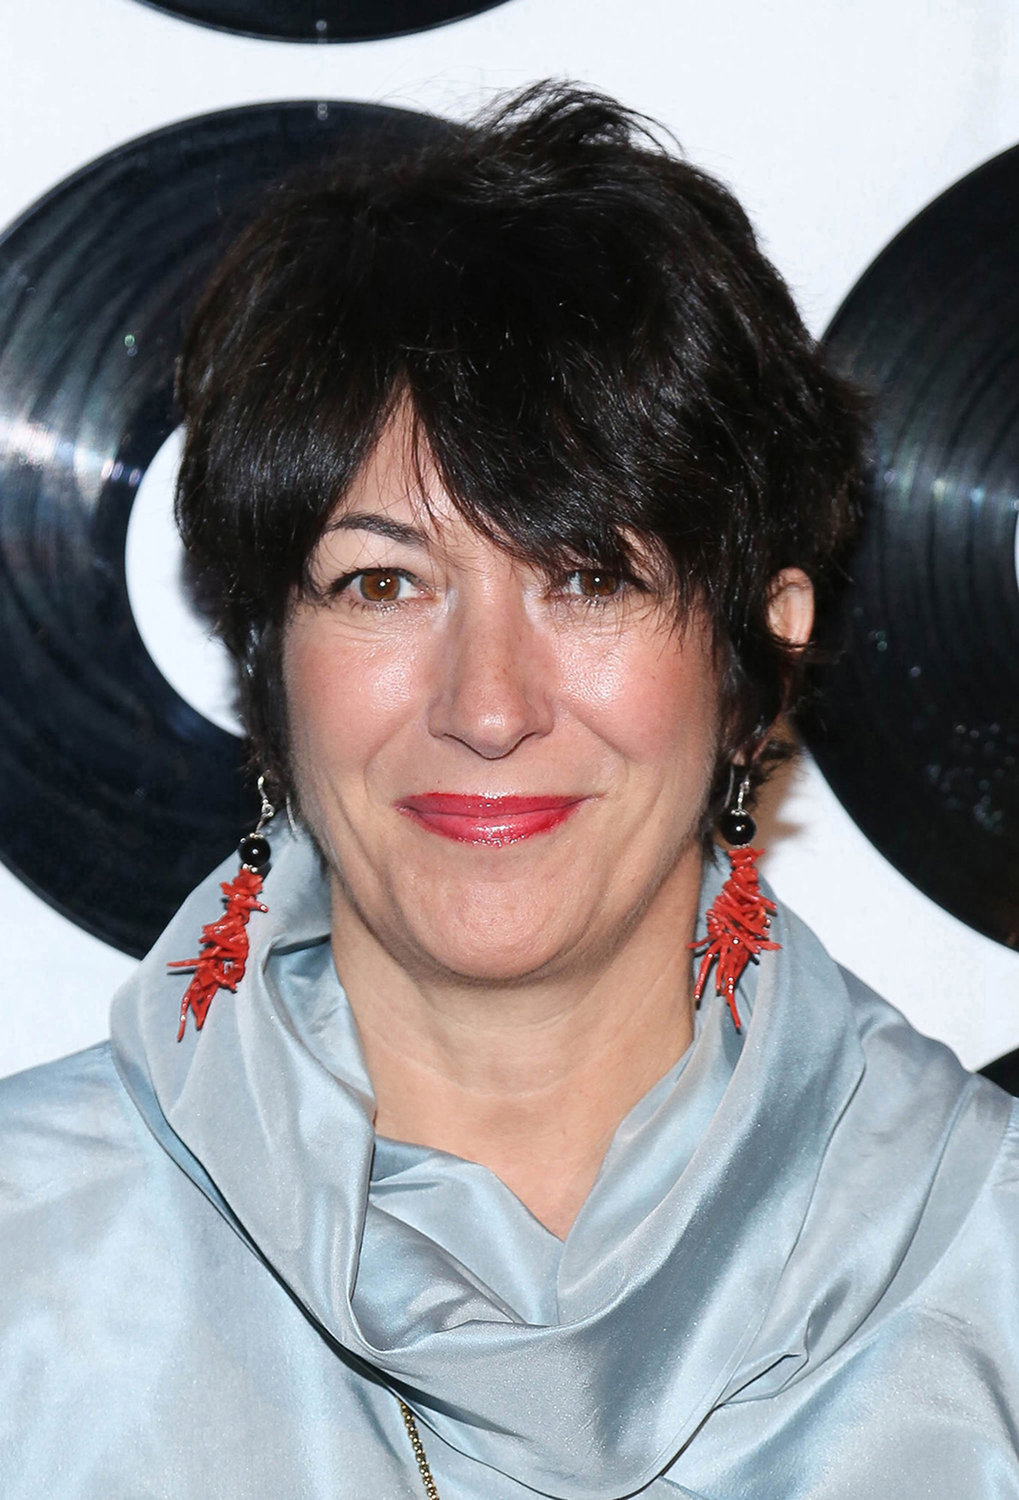 Ghislaine Maxwell attends the ETM Children's Benefit Gala in New York on May 6, 2014. (Rob Kim/Getty Images/TNS)